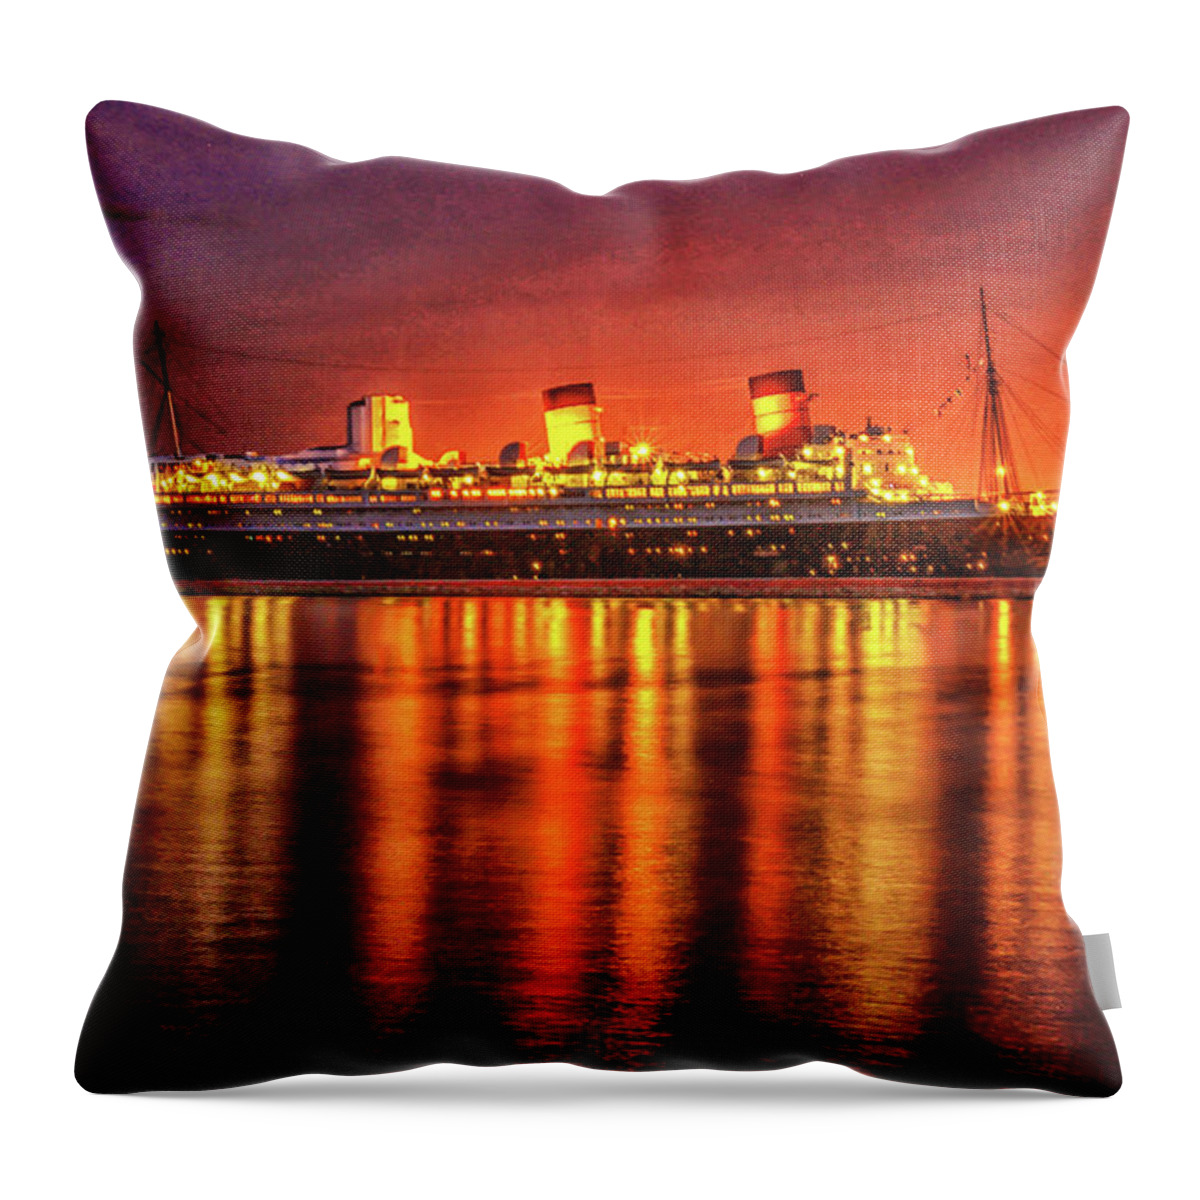 Queen Mary Throw Pillow featuring the photograph The Queen Mary by Robert Hebert